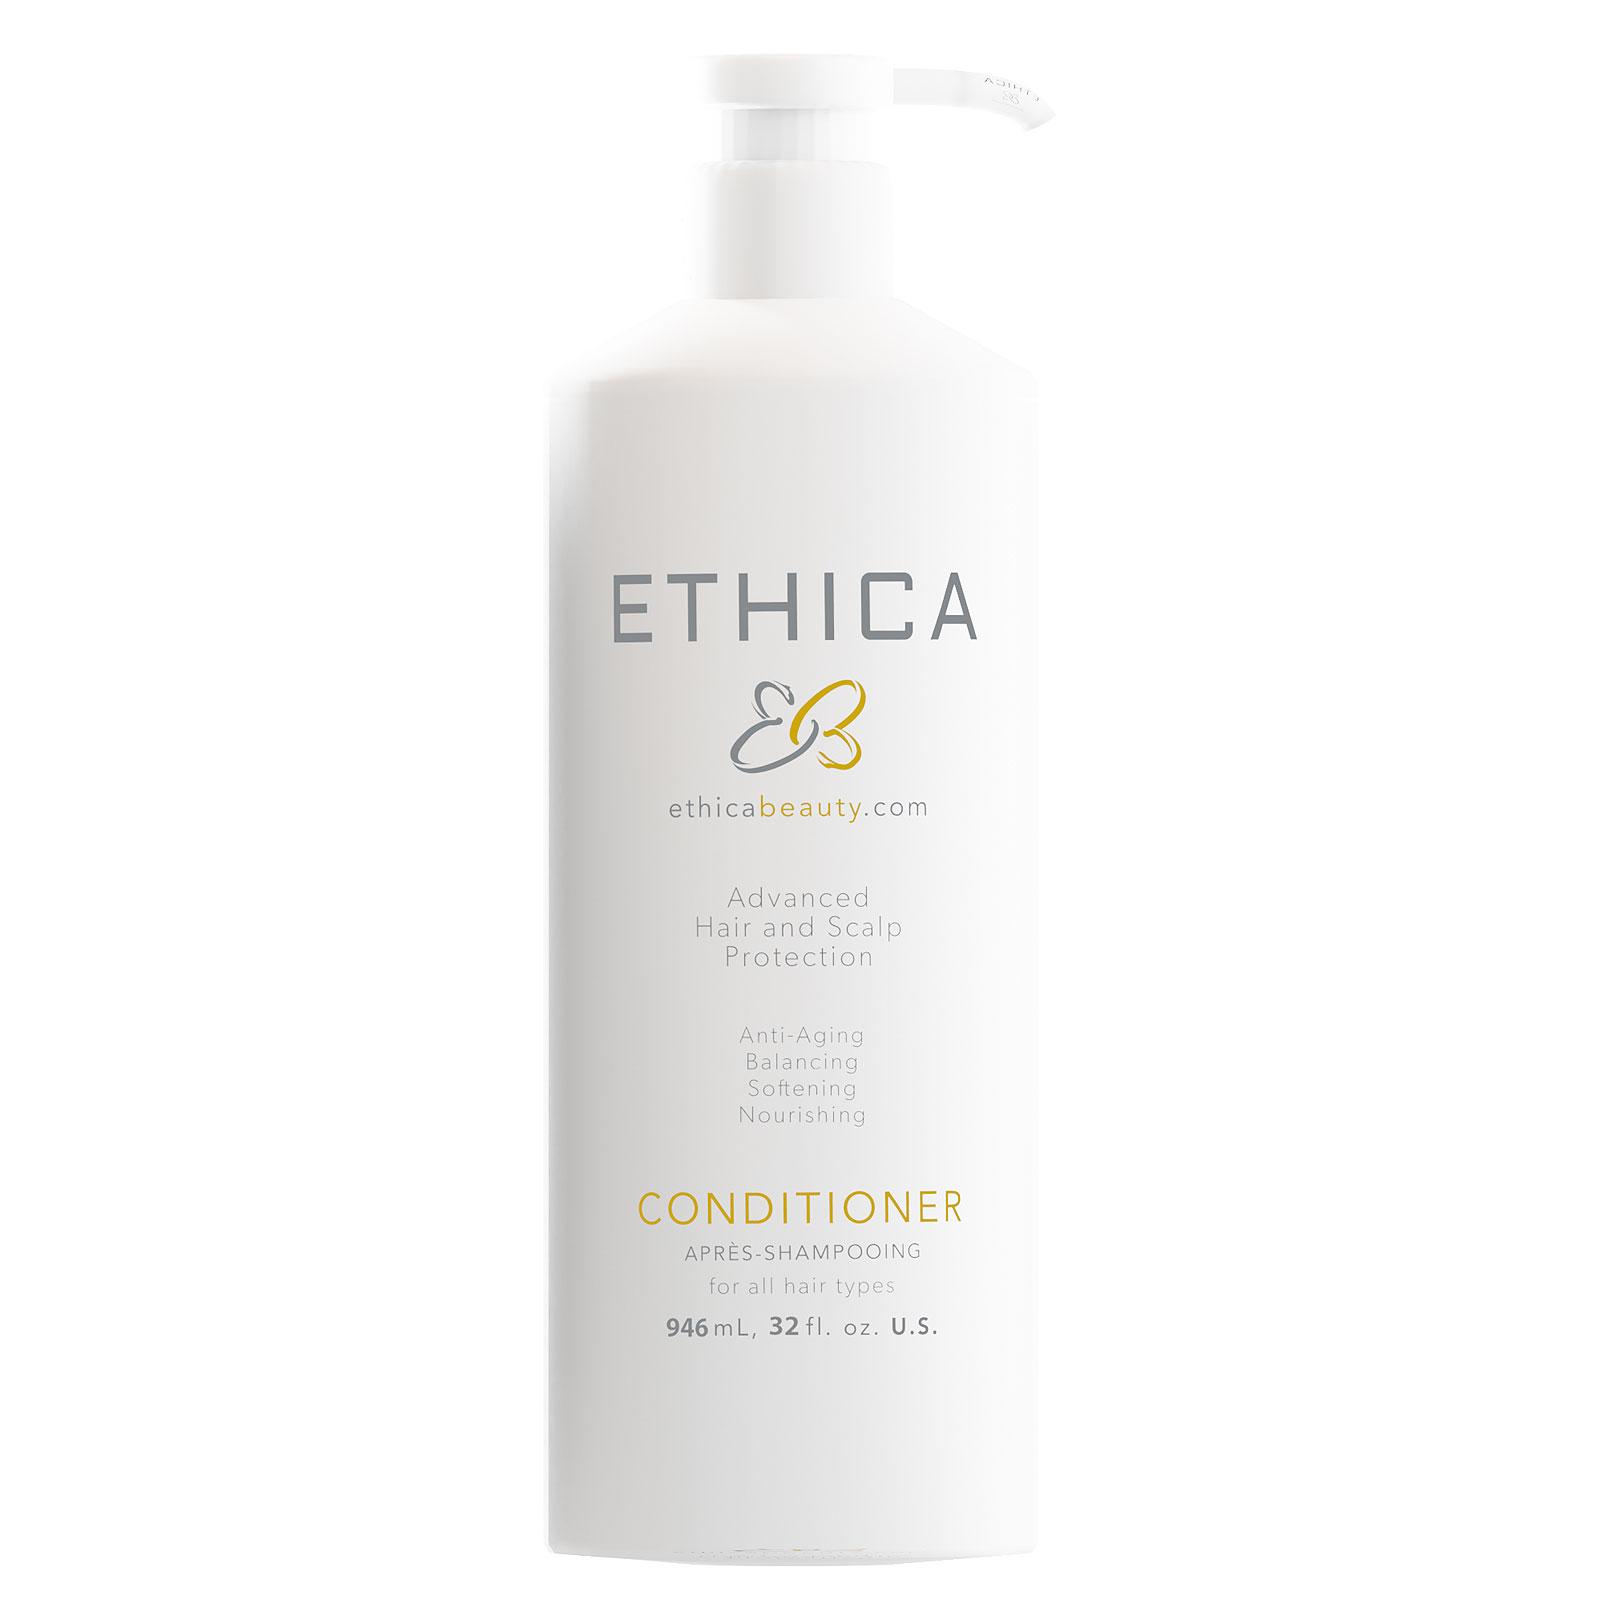 Ethica Anti-Aging Daily Conditioner